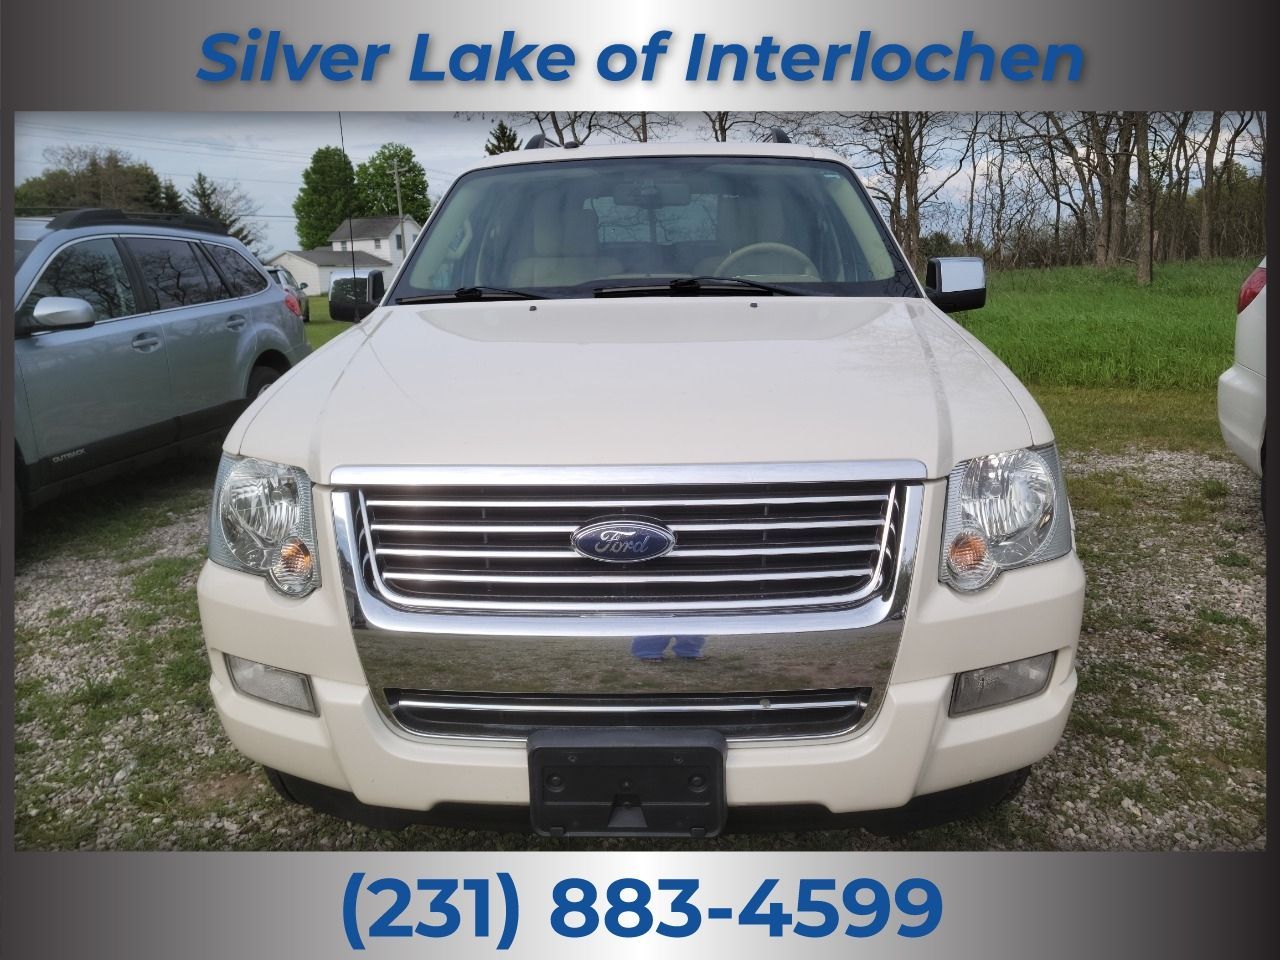 Used 2008 Ford Explorer